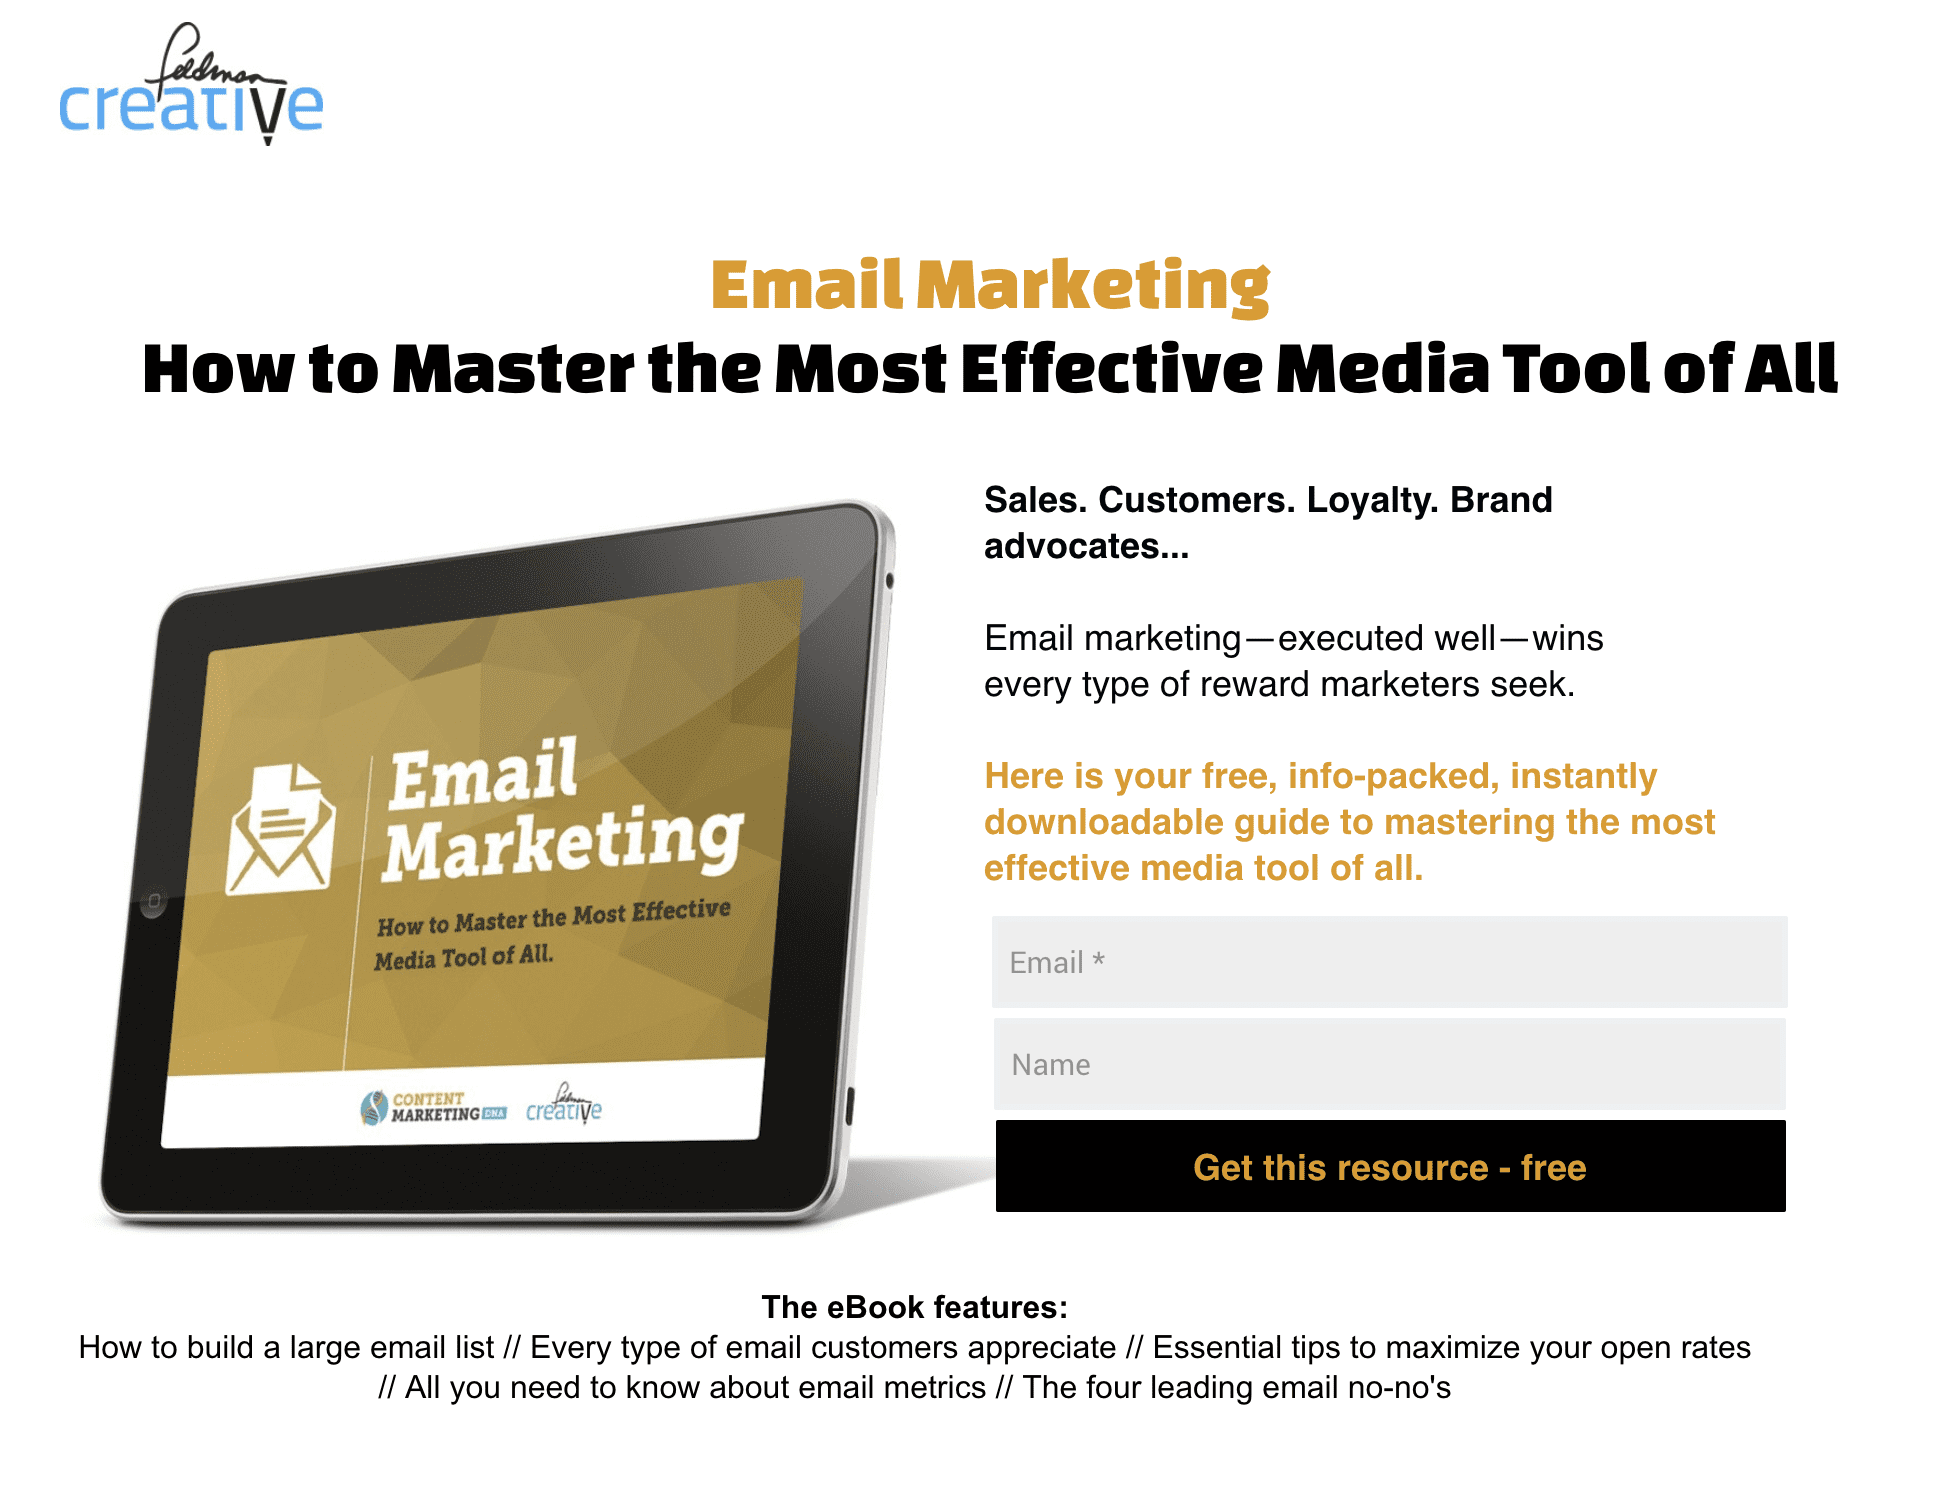 Free Email Marketing Ebook Offered